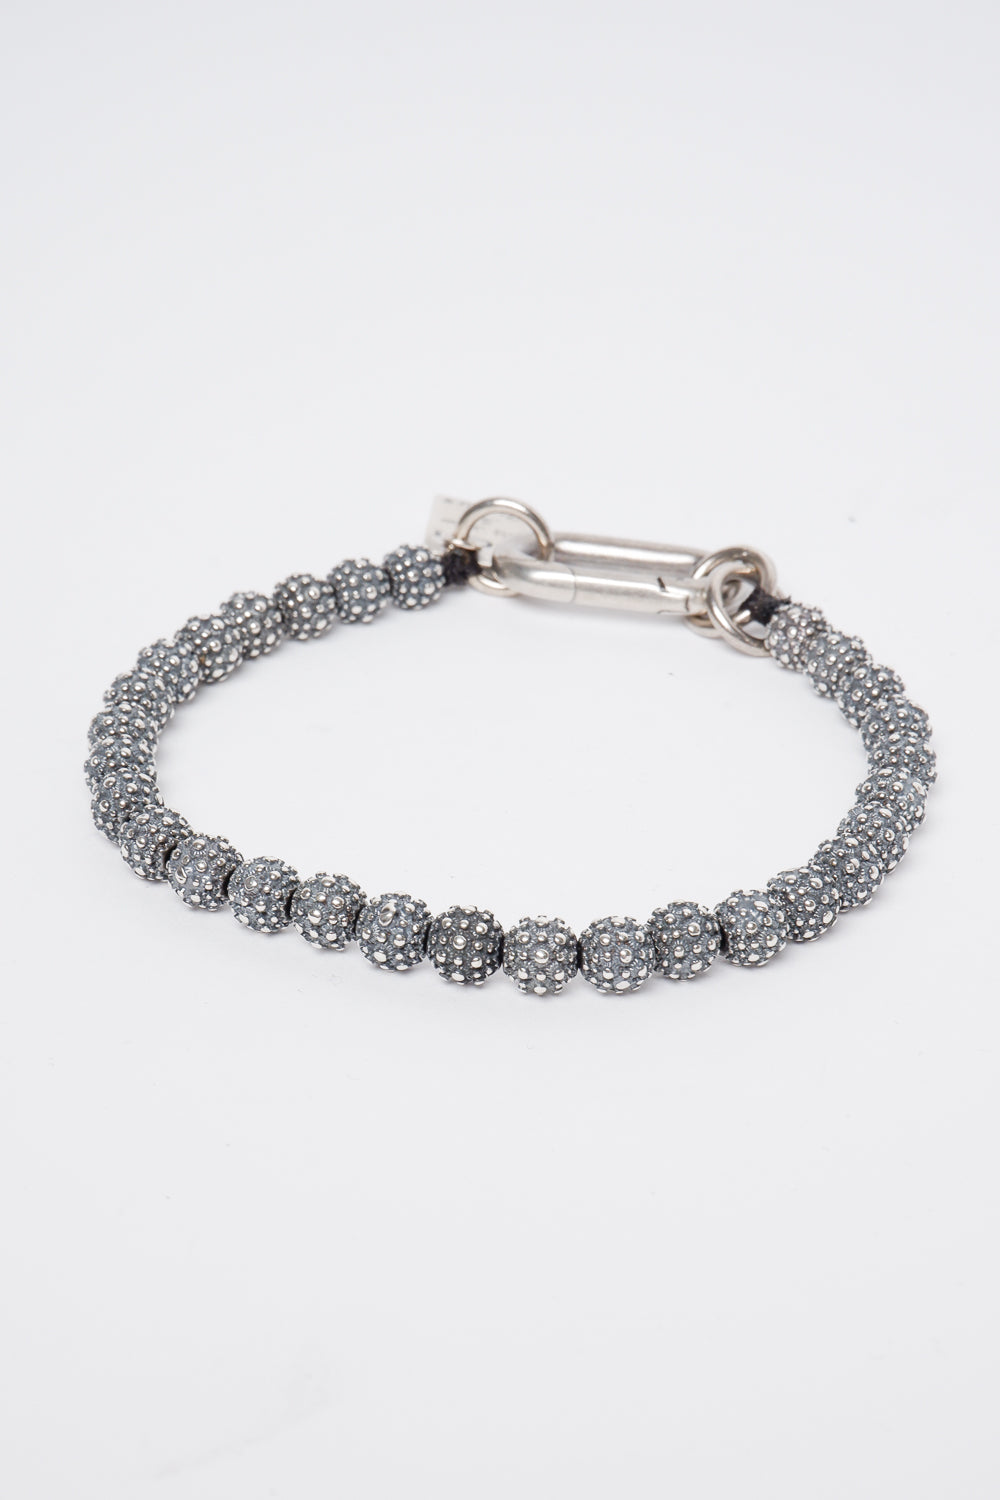 Buy the GOTI BR1282 Bracelet at Intro. Spend £50 for free UK delivery. Official stockists. We ship worldwide.